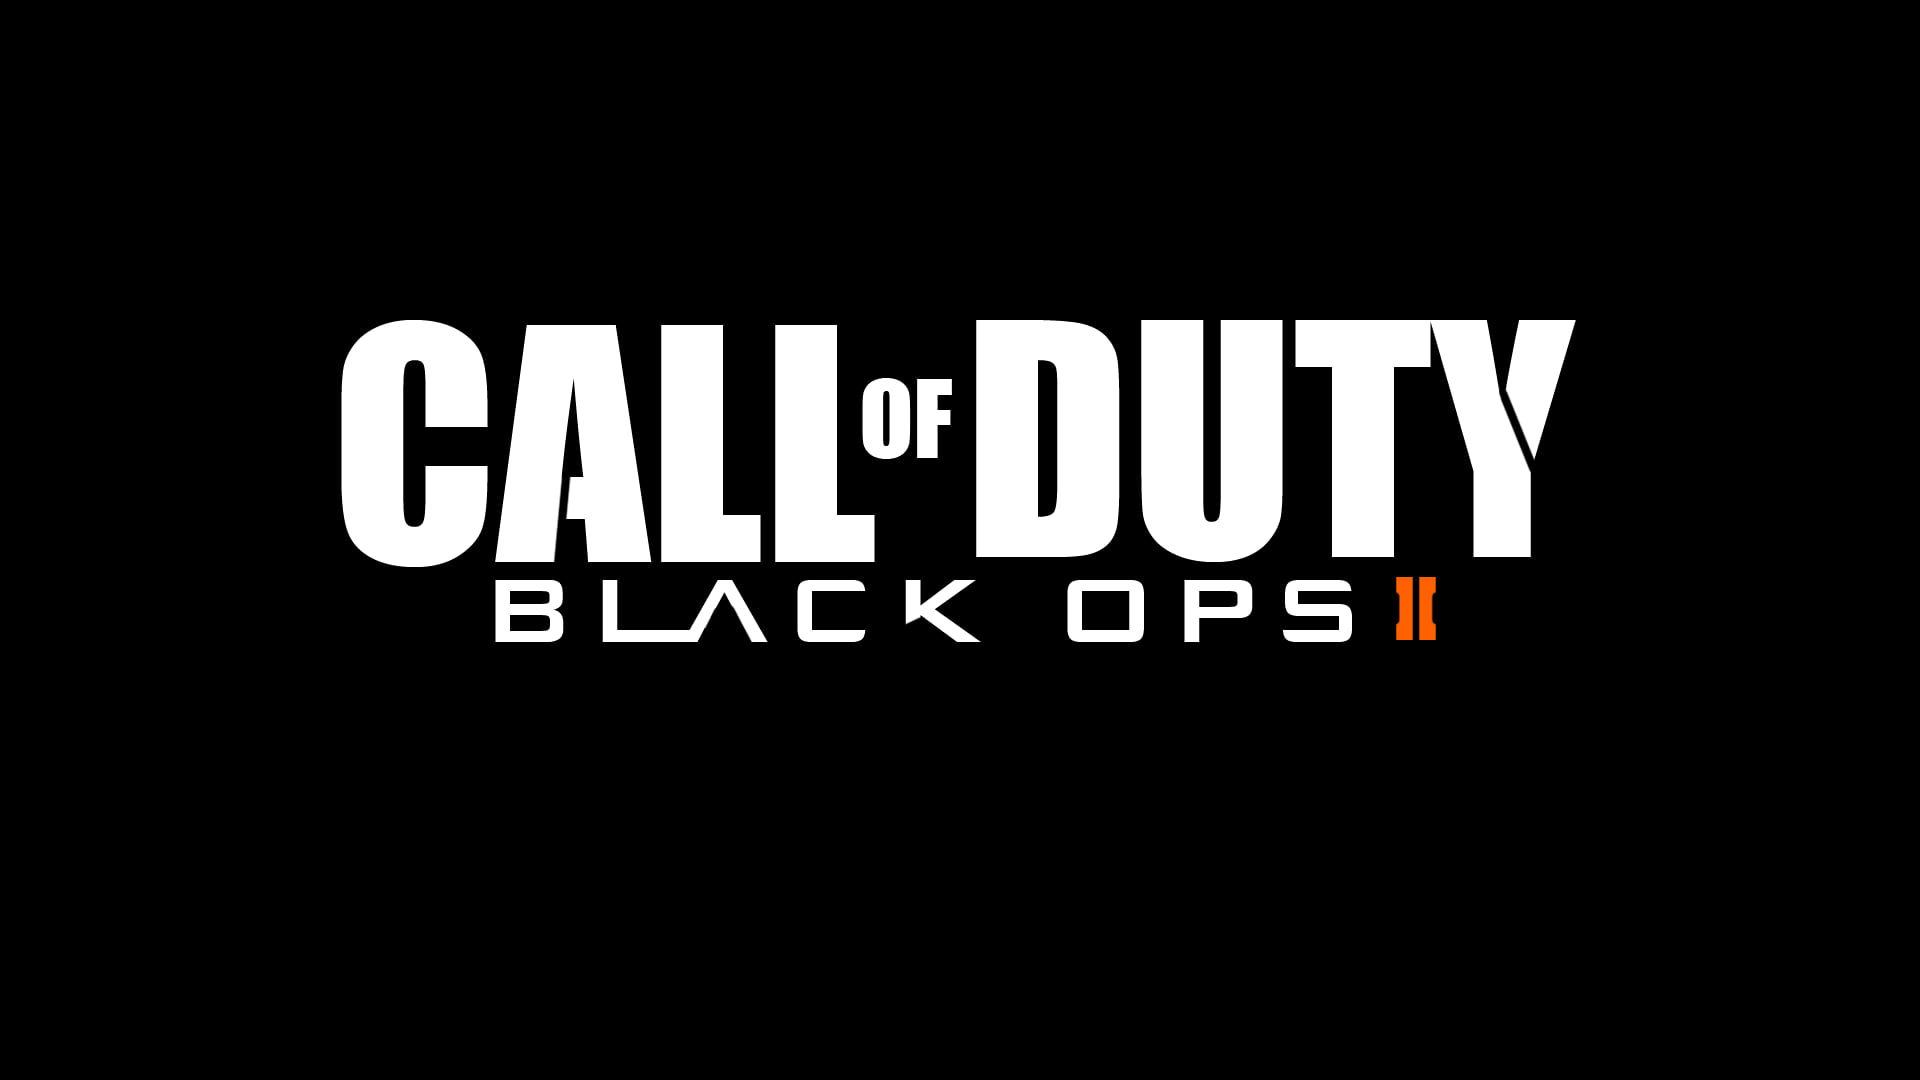 Call of Duty Black OPS ii text, Call of Duty, Call of Duty: Black Ops II, video games, black